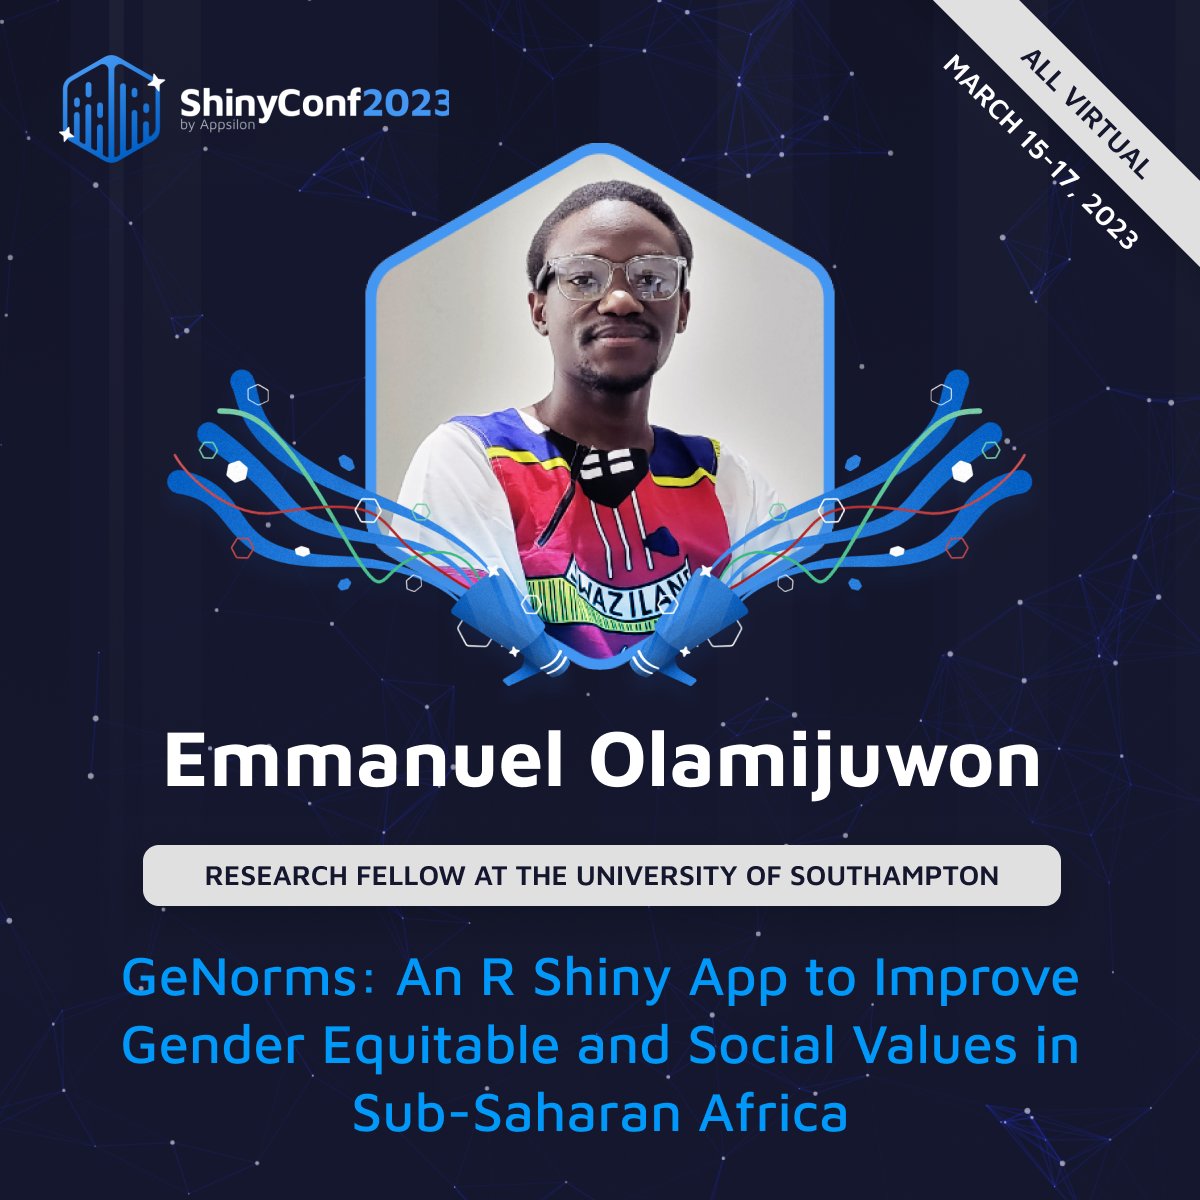 GeNorms ShinyConf presentation - R Shiny for social good in sub-Saharan Africa